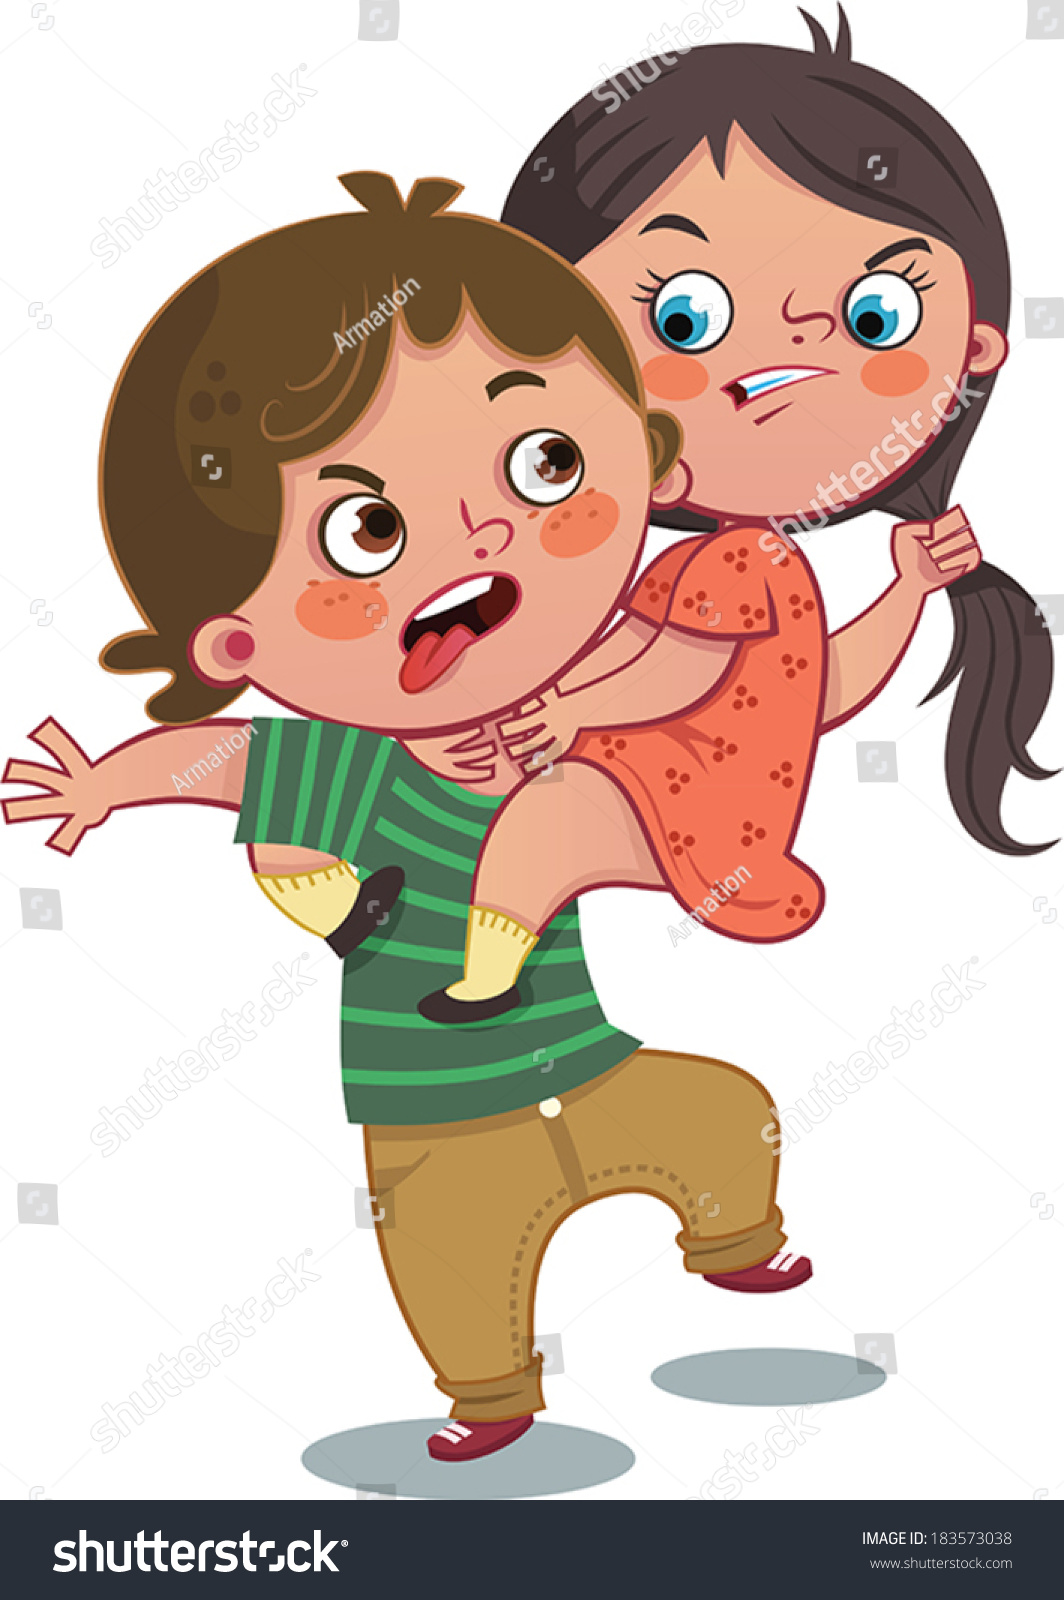 boy and girl fighting clipart - photo #9